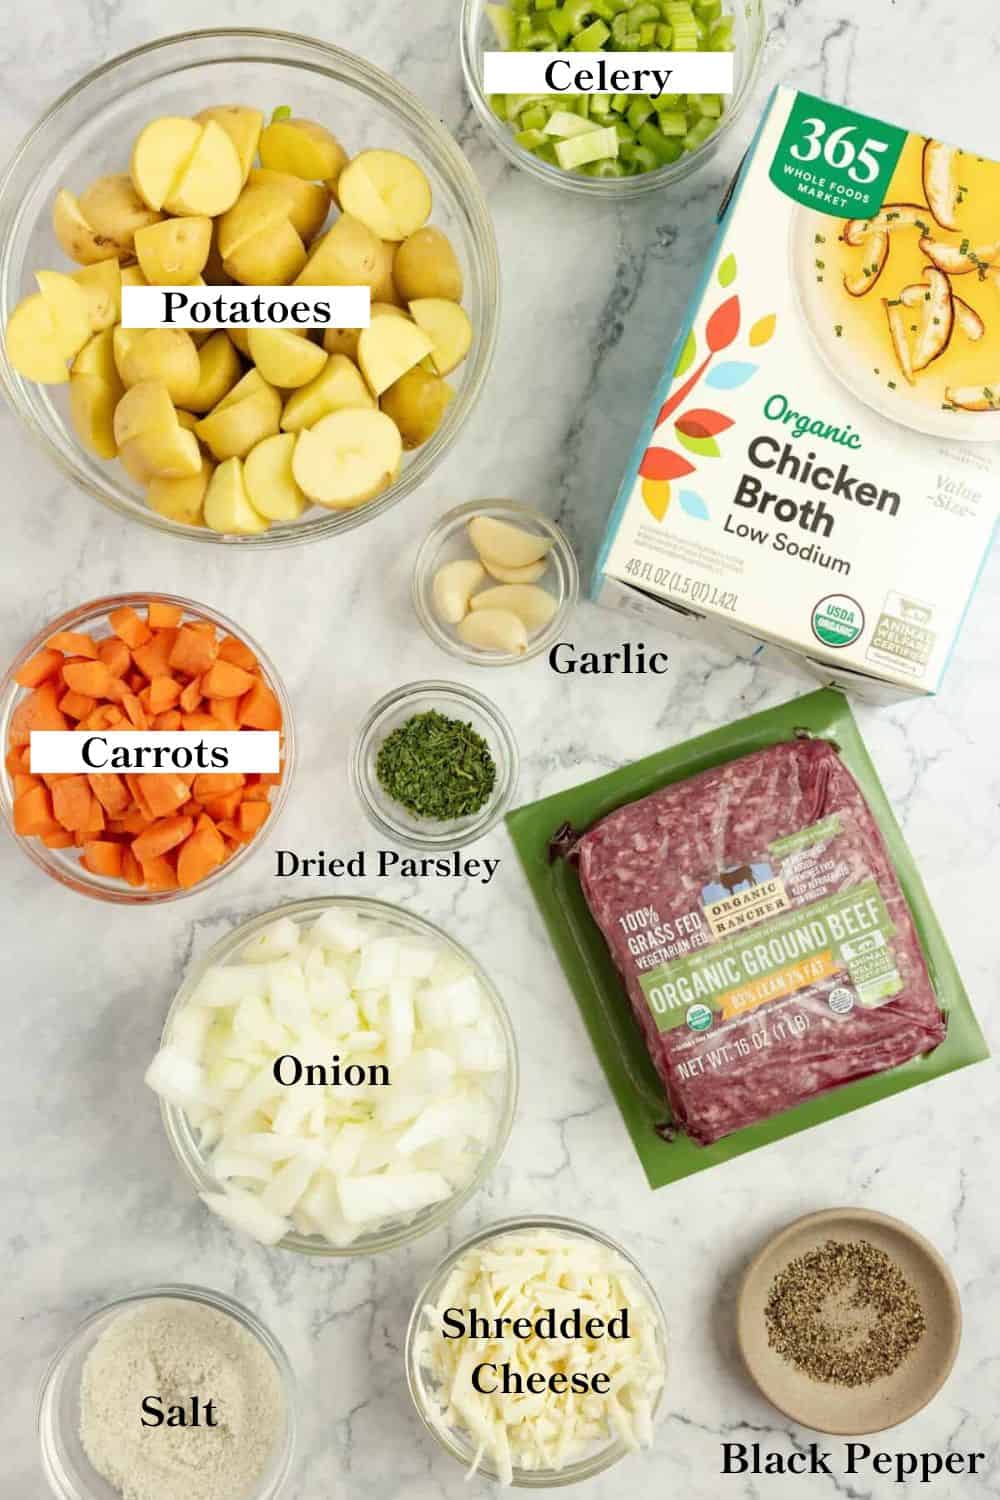 A box of chicken broth, a package of ground beef, bows filled with carrots, potatoes, onions, parsley and garlic on a white countertop.